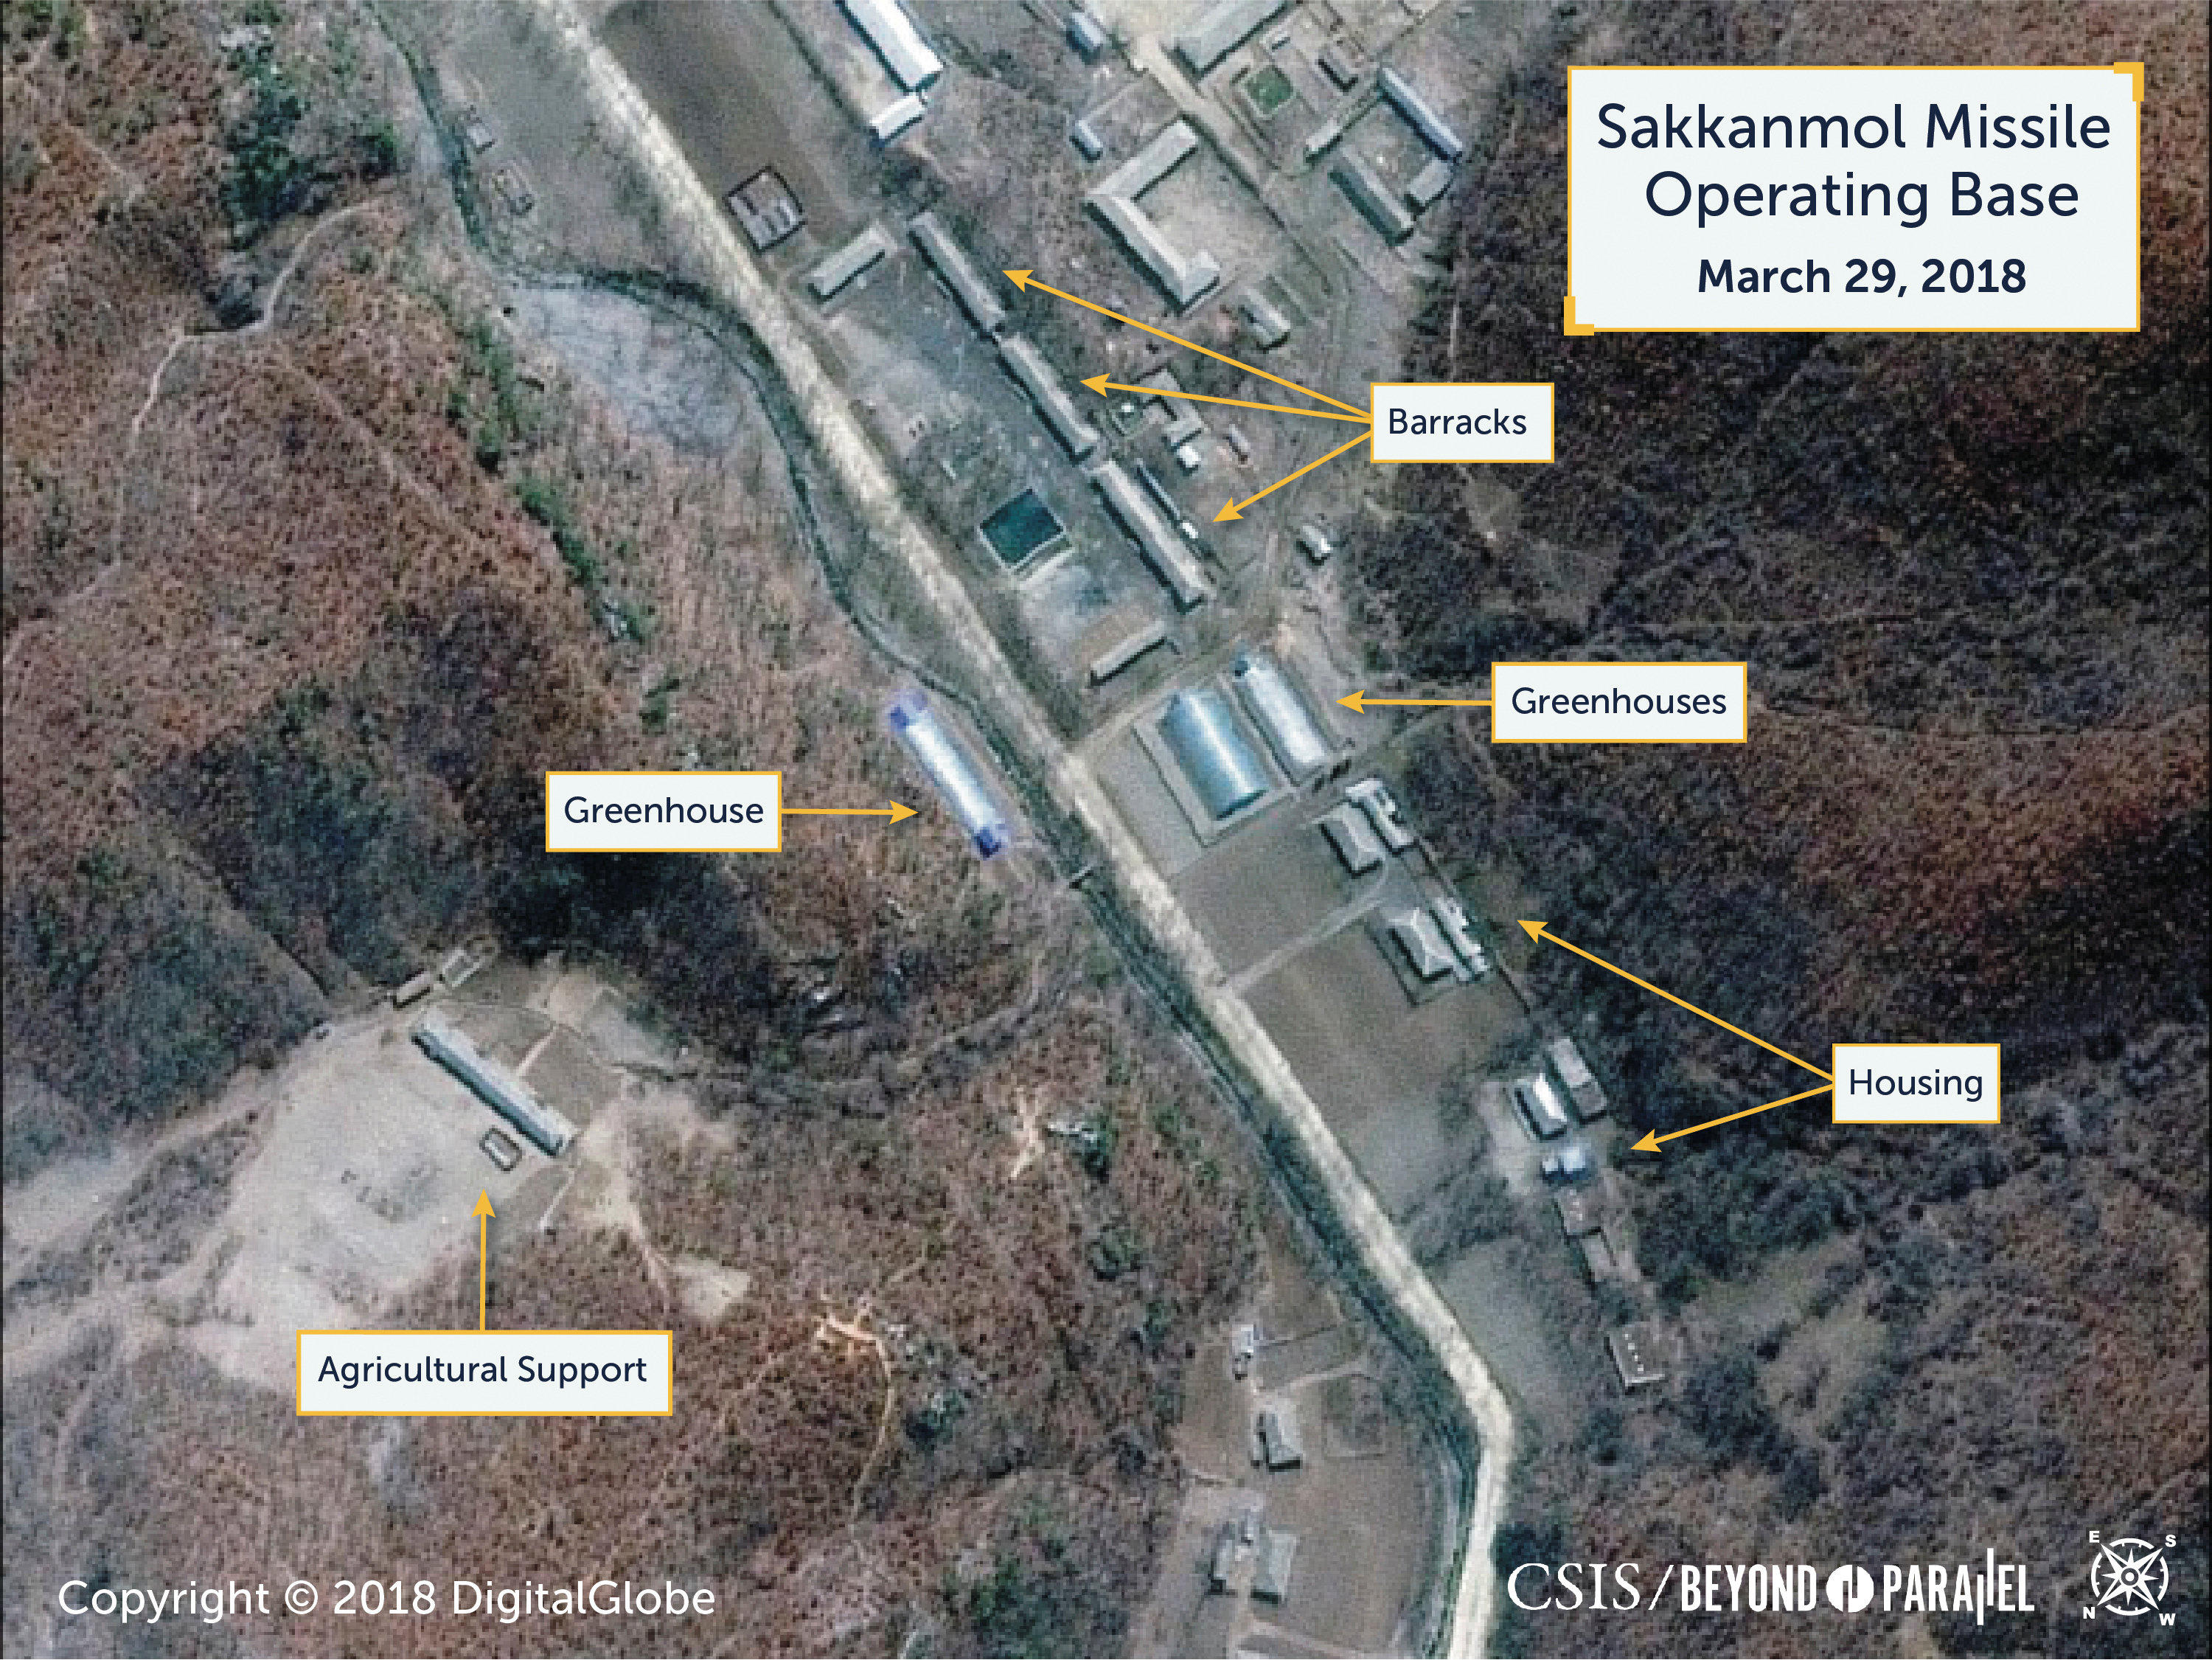 North Korea hidden missile sites from CSIS report ...